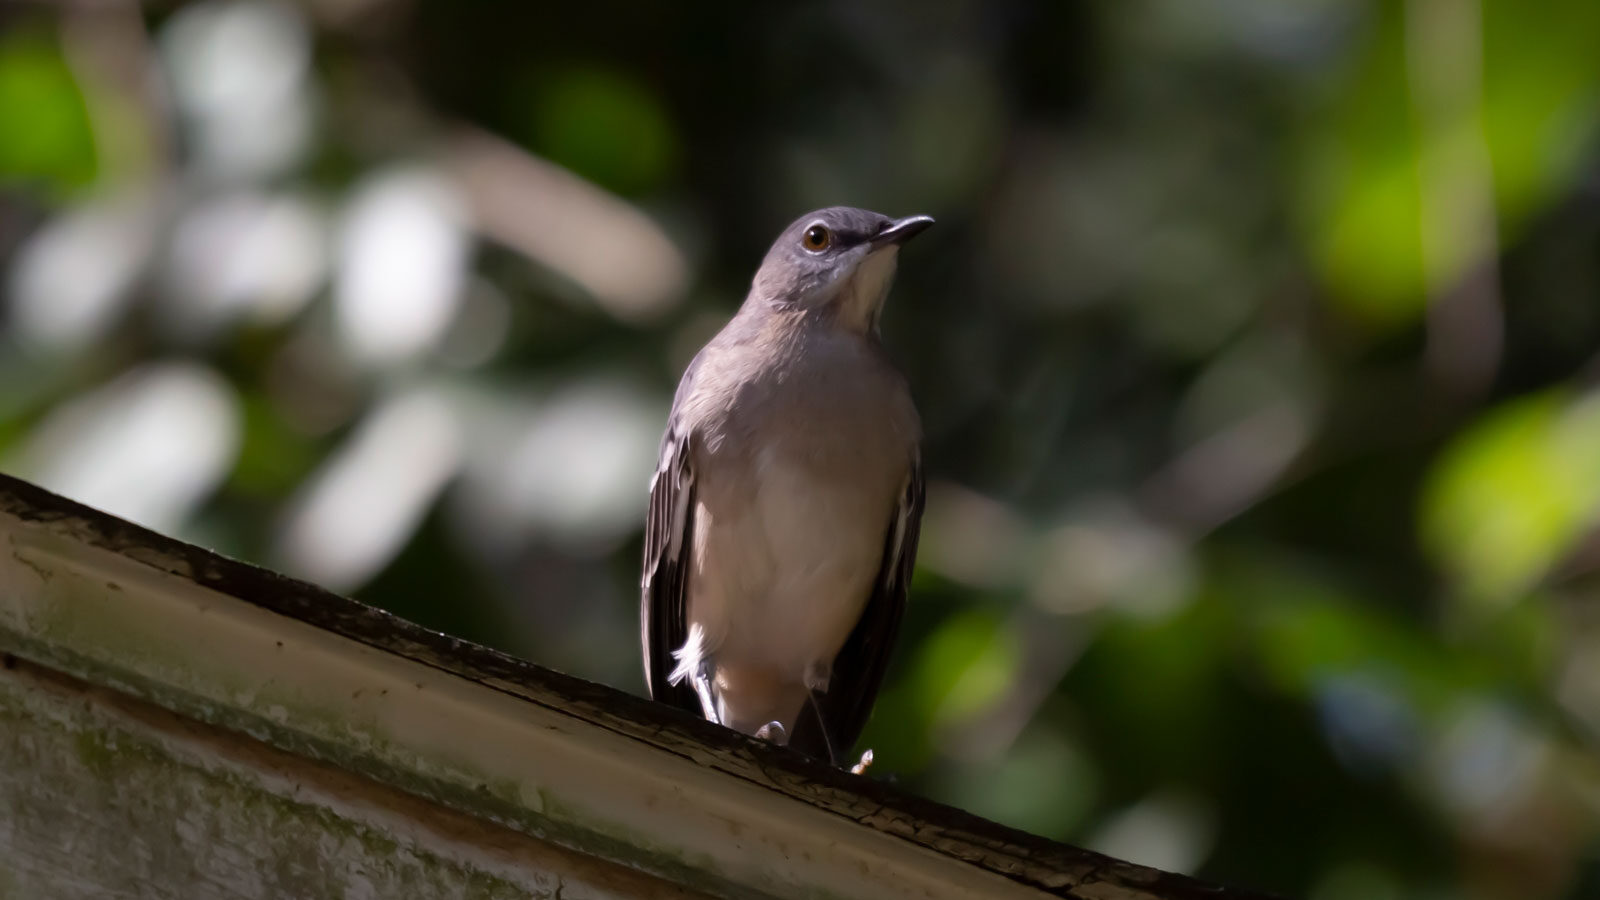 Northern mockingbird standing on the edge of a roof